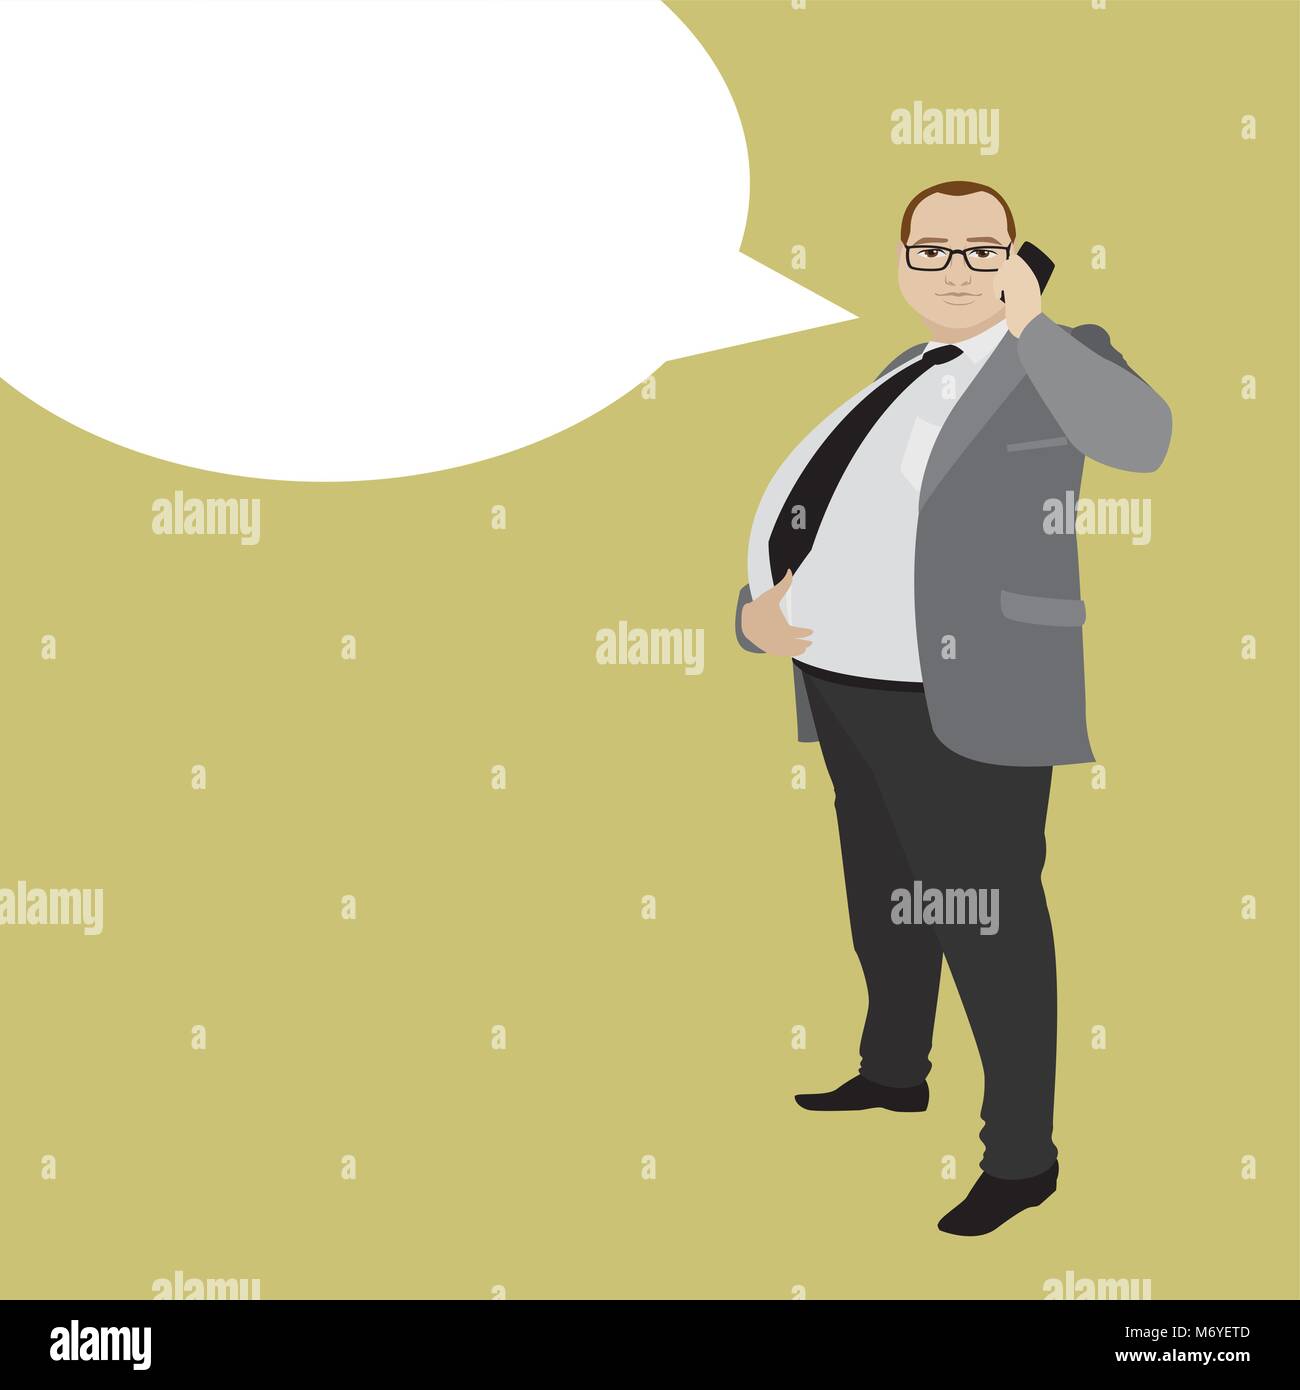 cartoon fat businessman with cell phone and speech bubble, stock vector illustration. Stock Vector